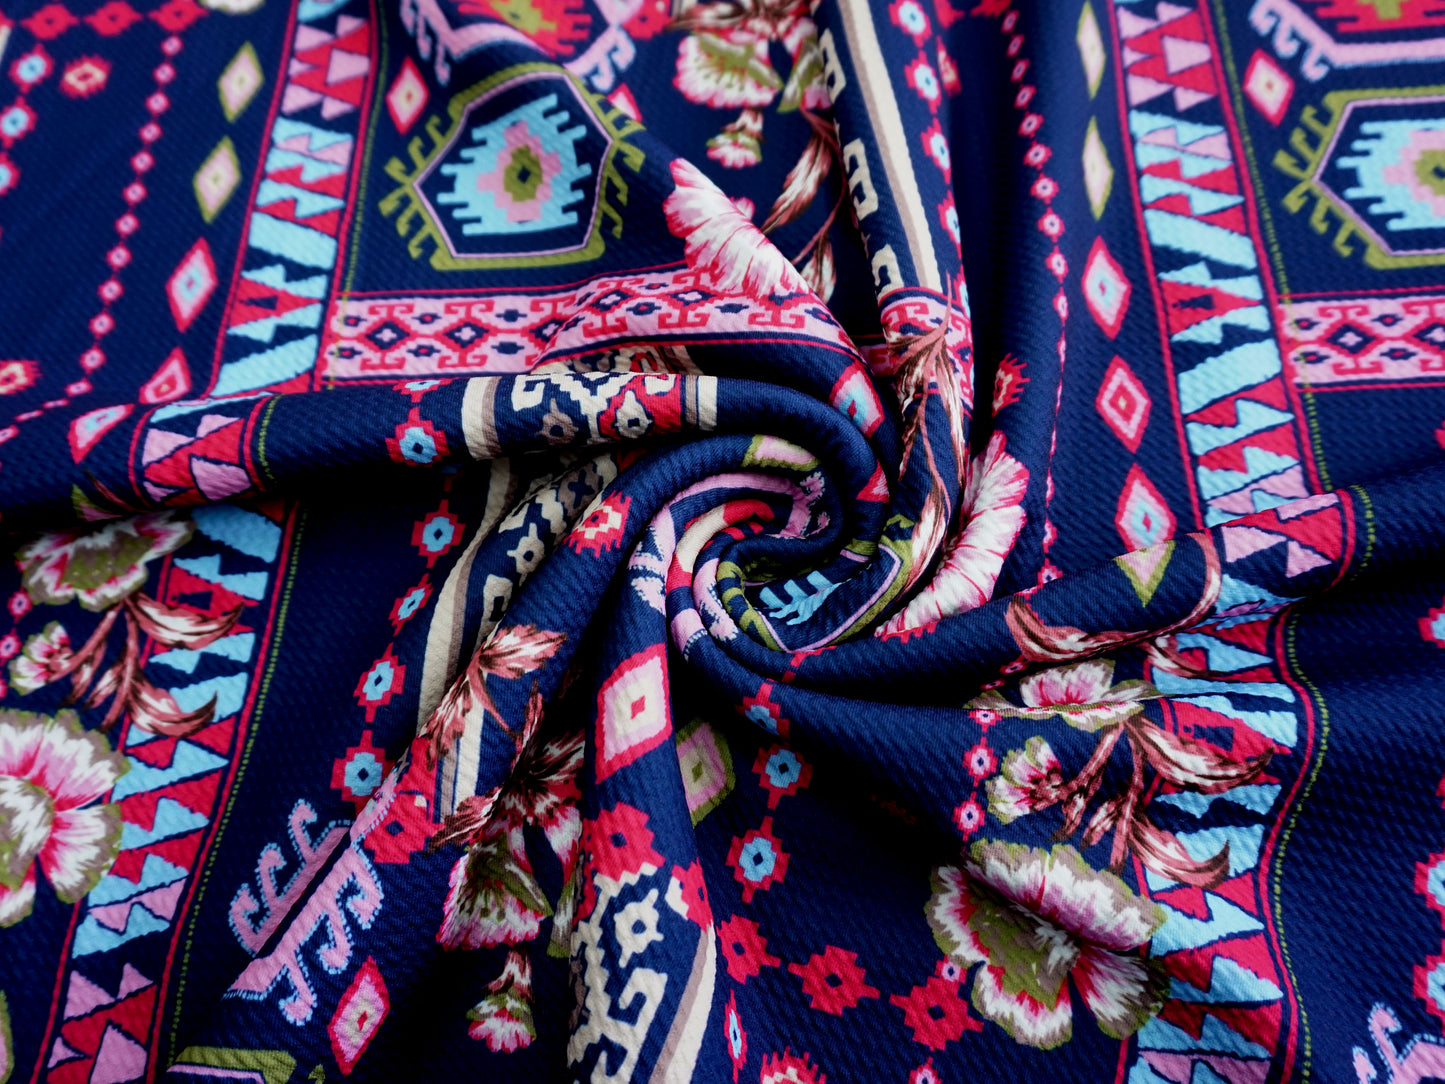 Bullet Knit Printed Fabric-Navy Blue Fuchsia Aztec-BPR051-Sold by the Yard